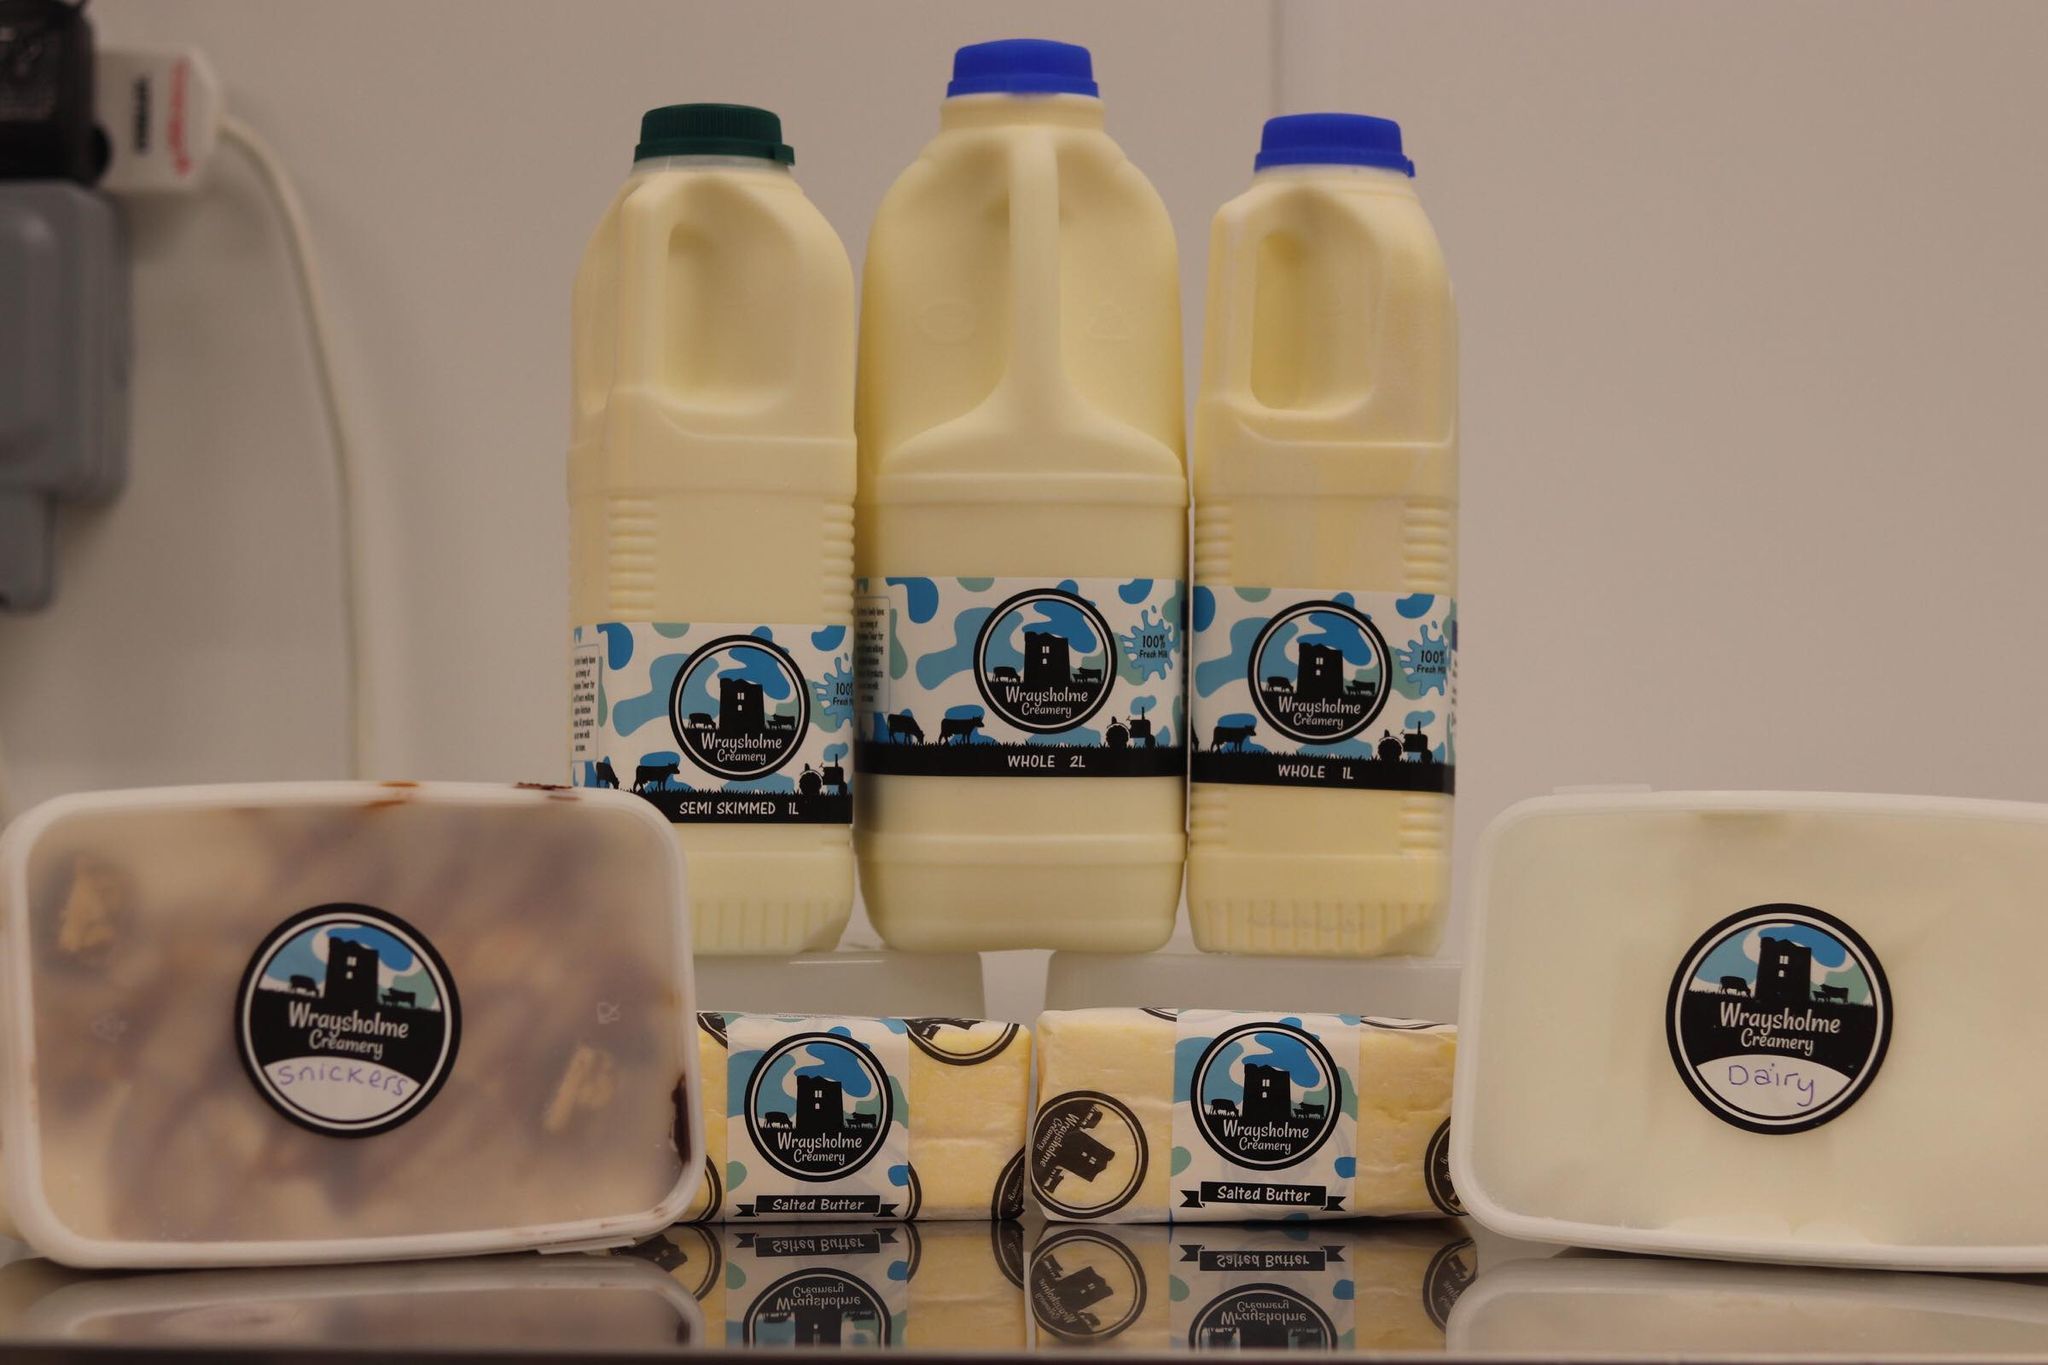 PRODUCING: Wraysholme Creamery is owned and operated by Paul and Steve Morris